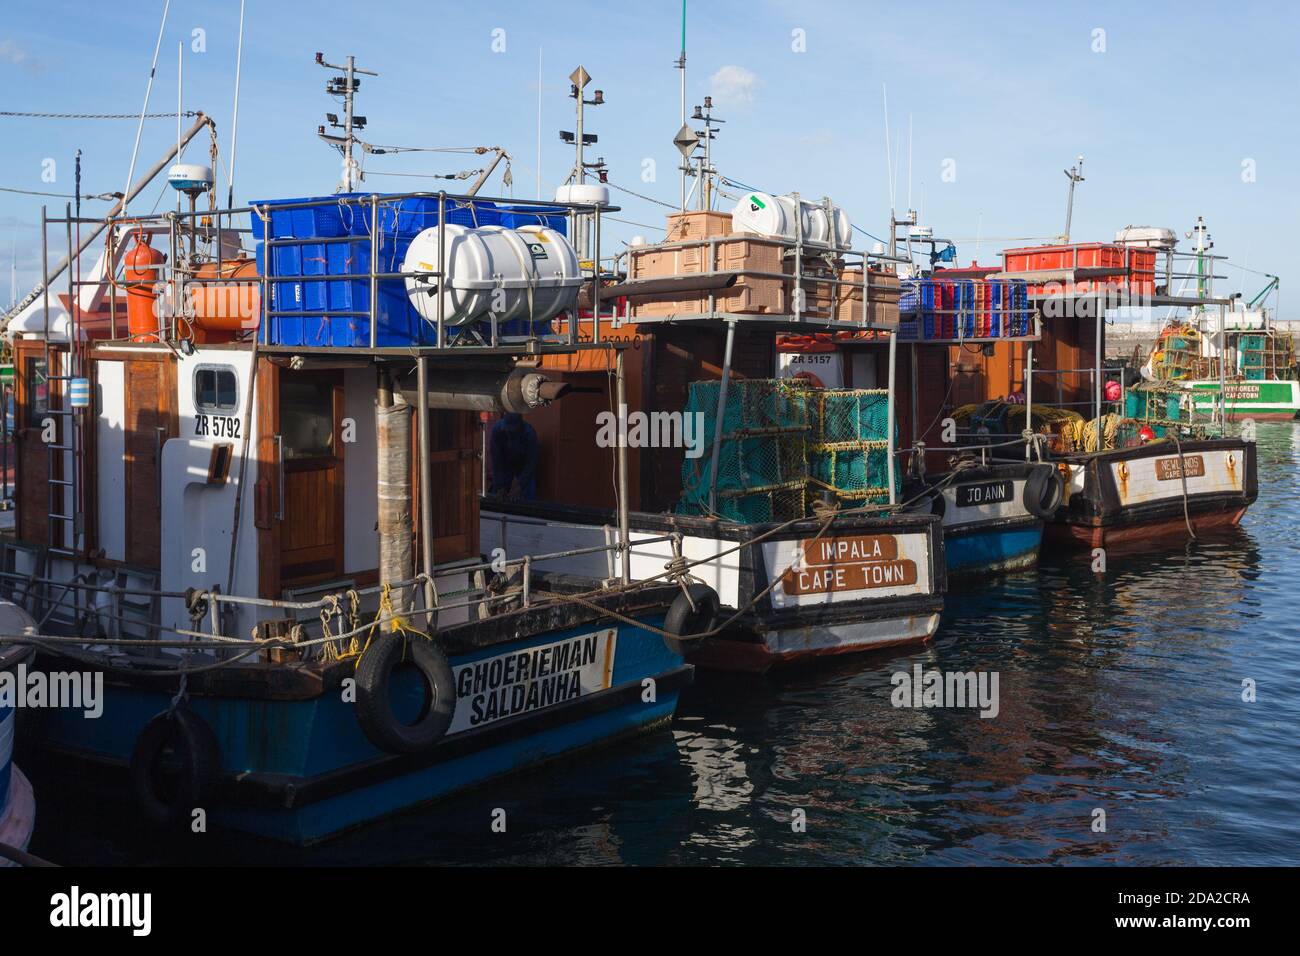 fishing boats or vessels in a line or row in Kalk Bay harbour, Cape Town, South Africa concept commercial fishing industry in Africa Stock Photo